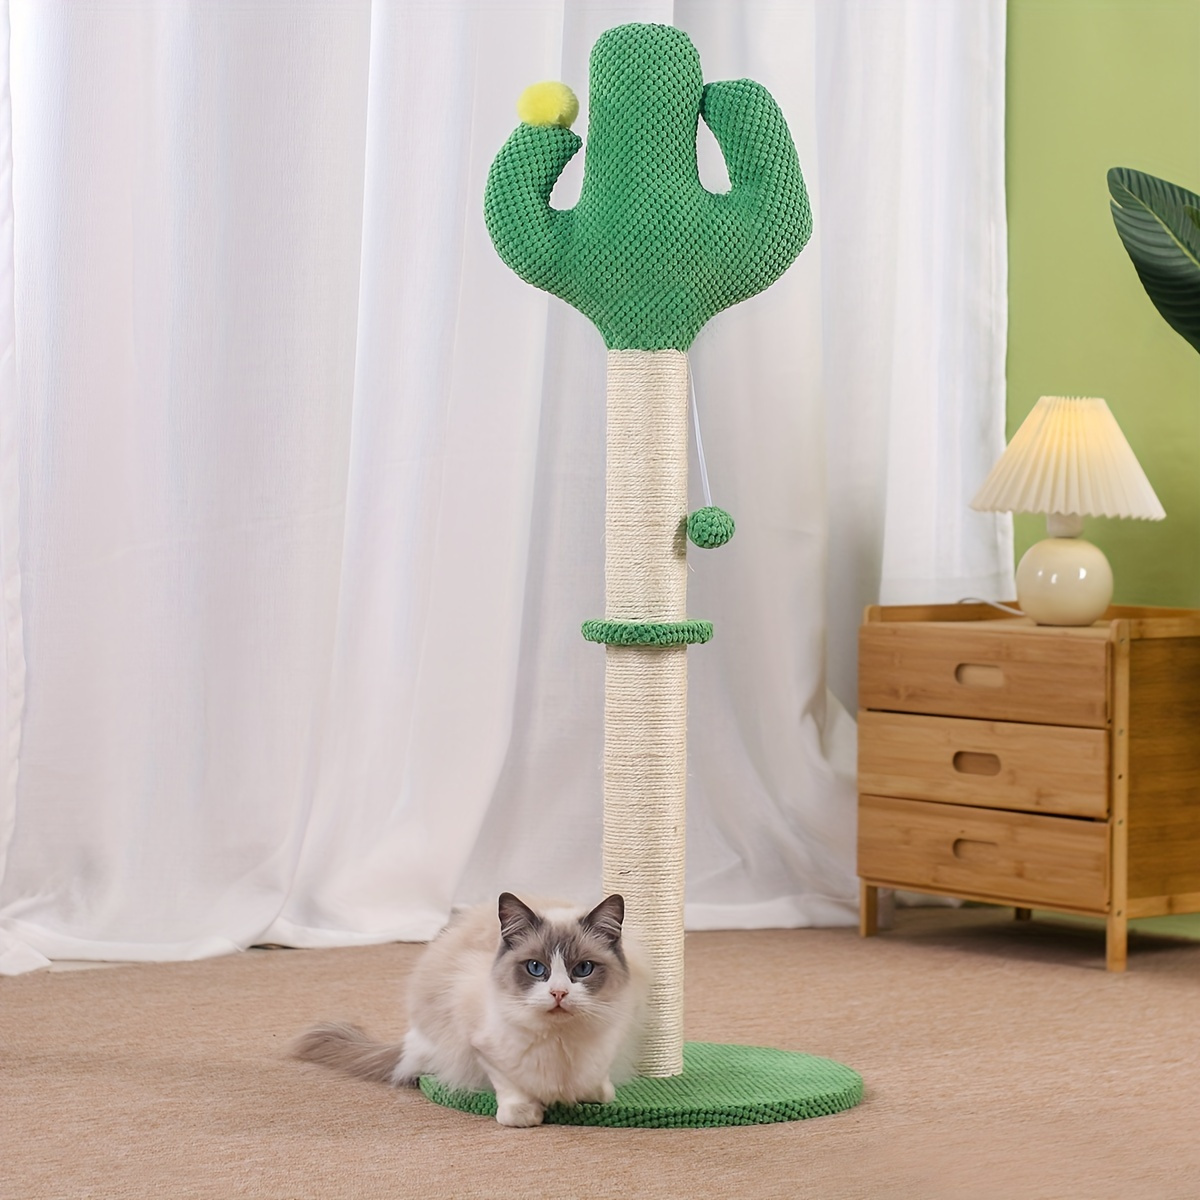 

Cactus Cat Scratching Post With Sisal Rope - Durable Indoor Climbing Tree For Cats, Claw Grinding Scratcher Pole With Hanging Ball Toy - Ideal For Cat Entertainment And Exercise